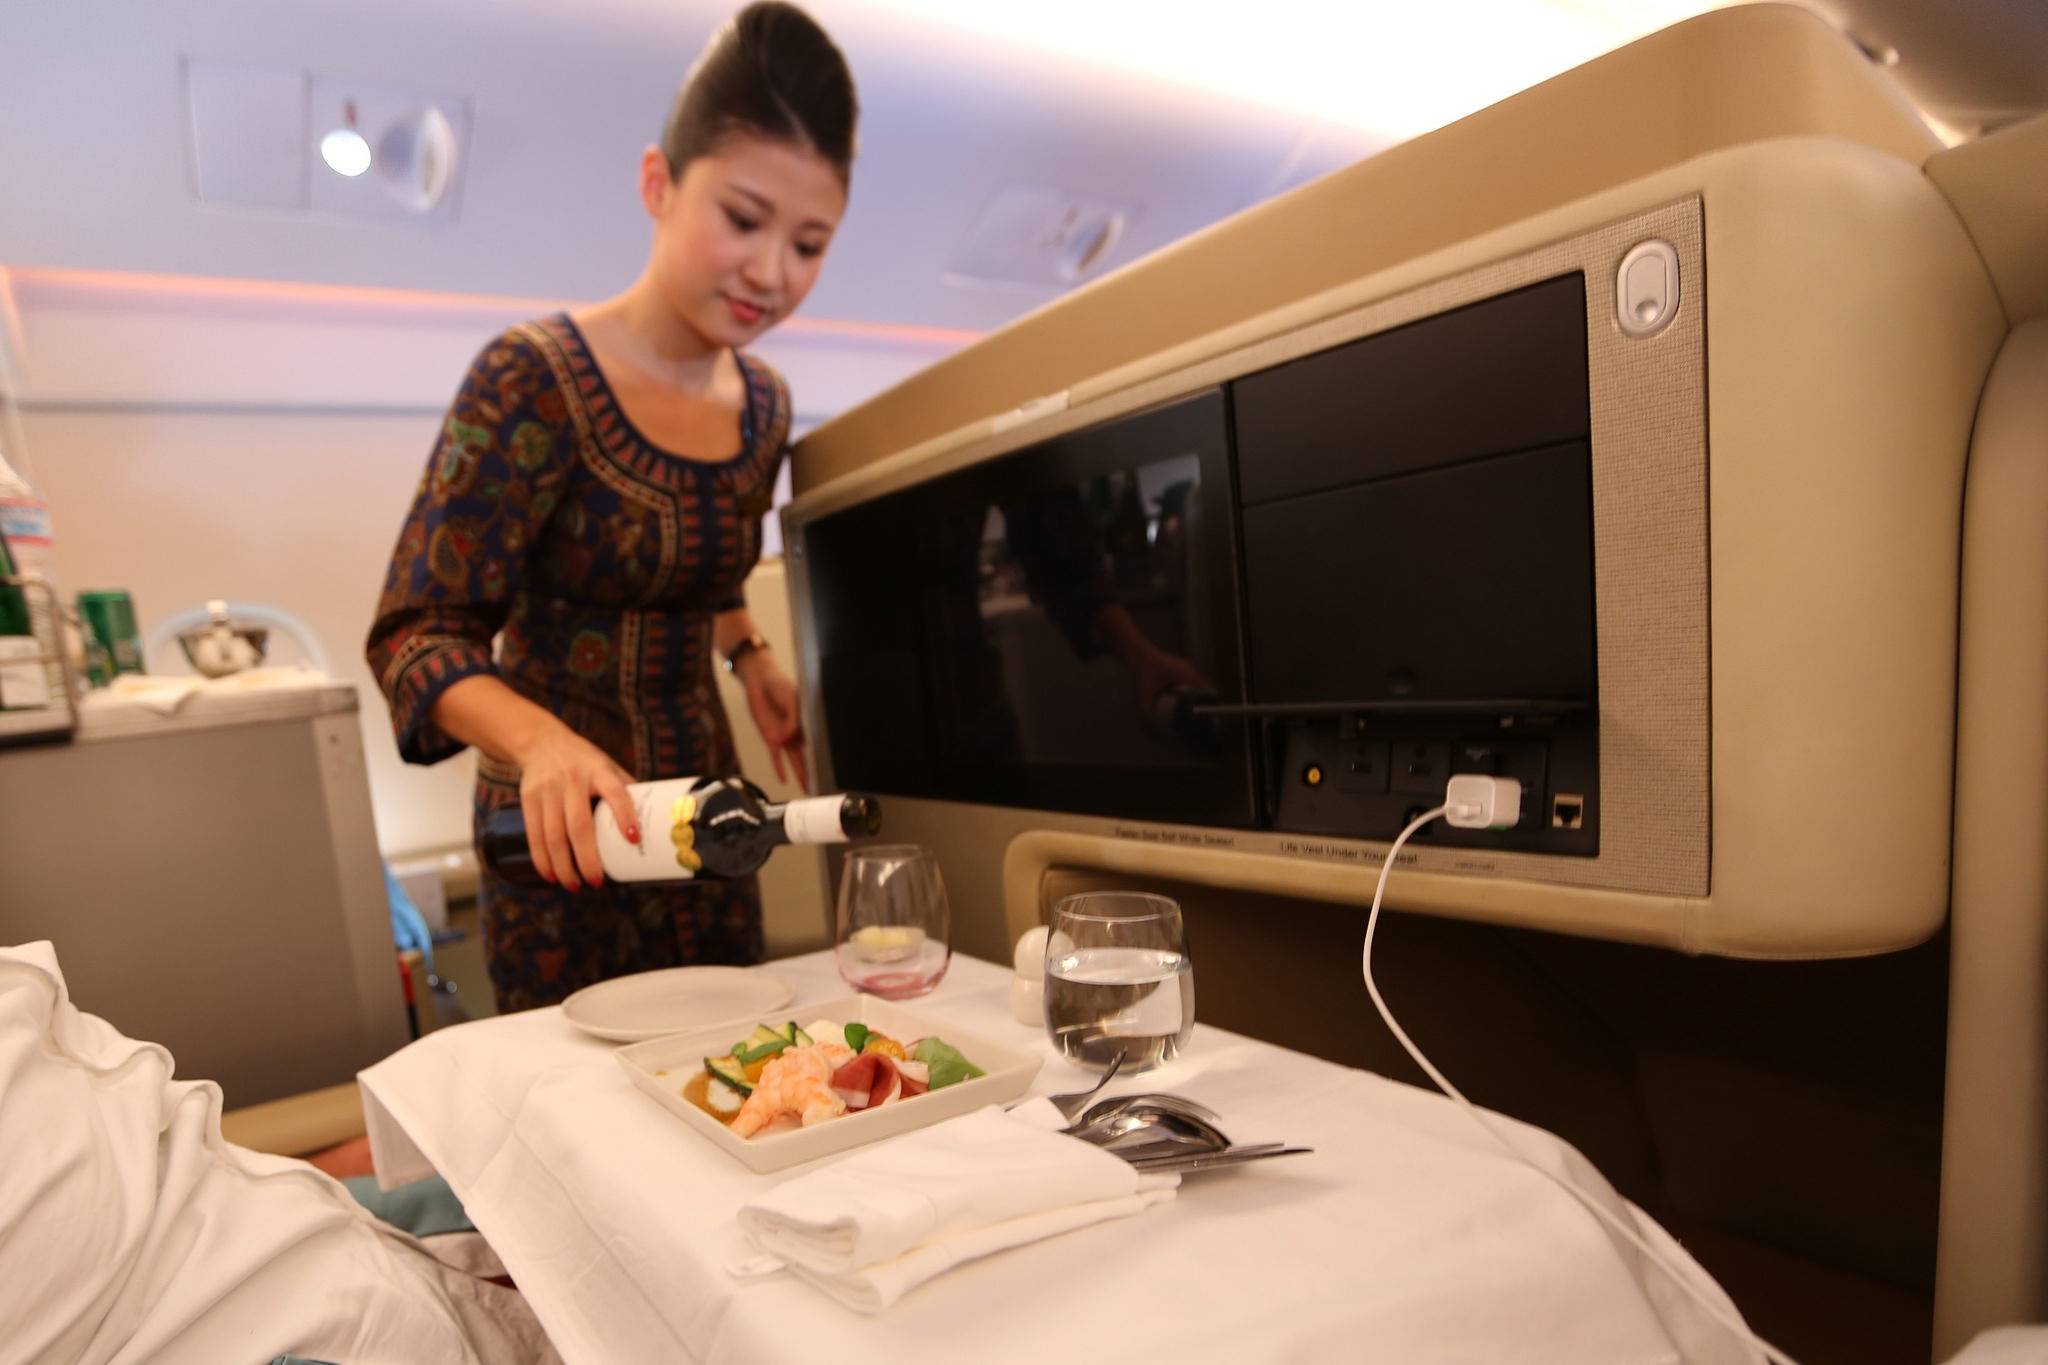 Airlines are upgrading food in economy class